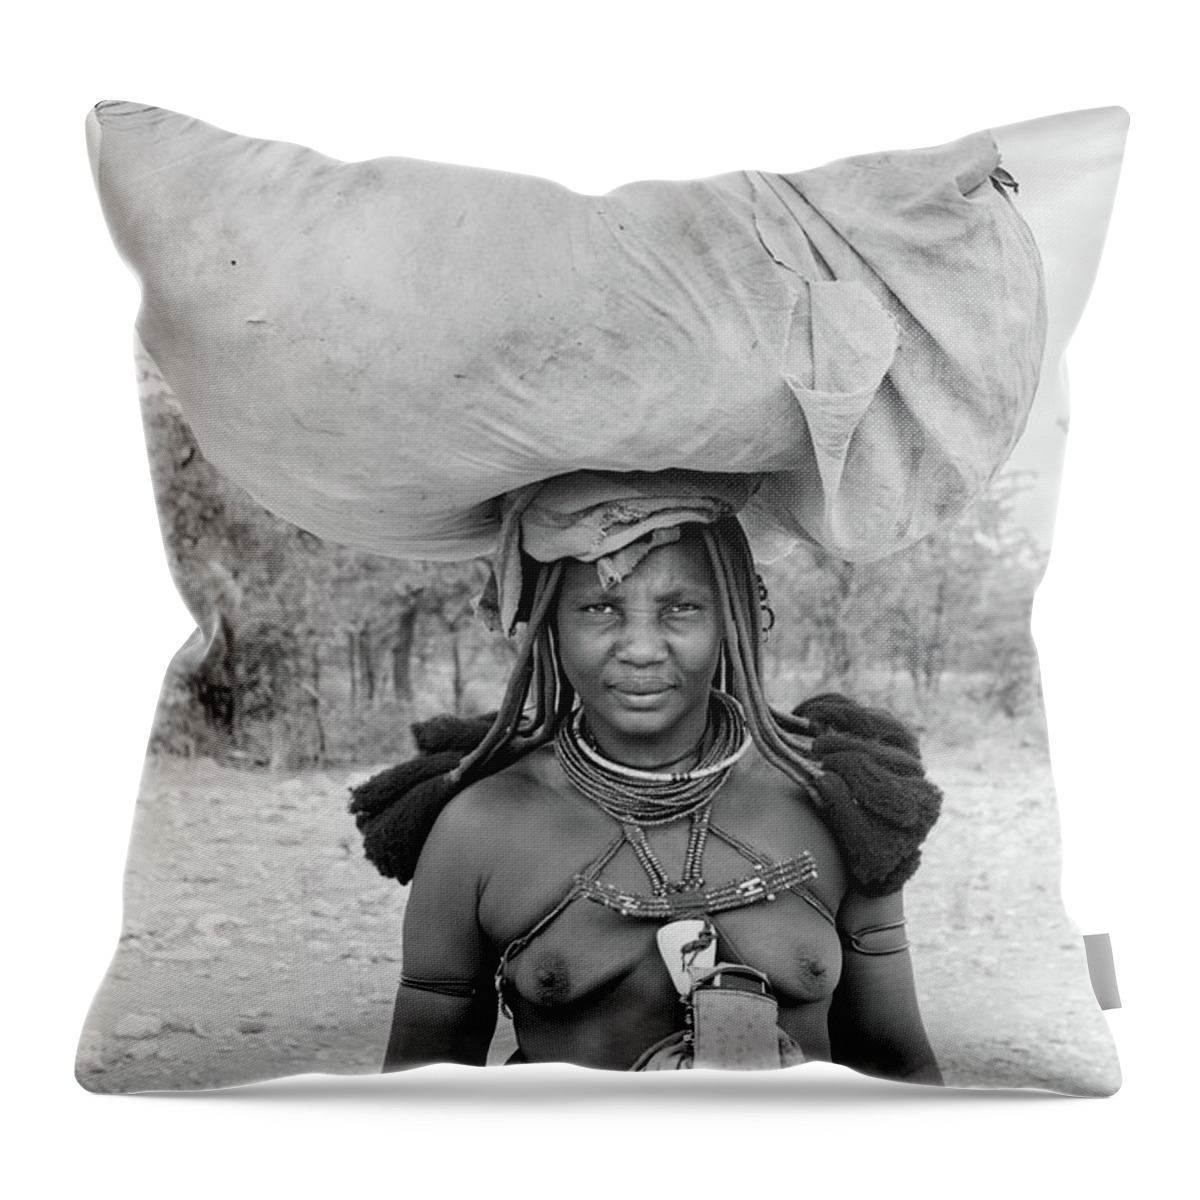 Potrait Throw Pillow featuring the photograph Tribes Portrait by Mache Del Campo